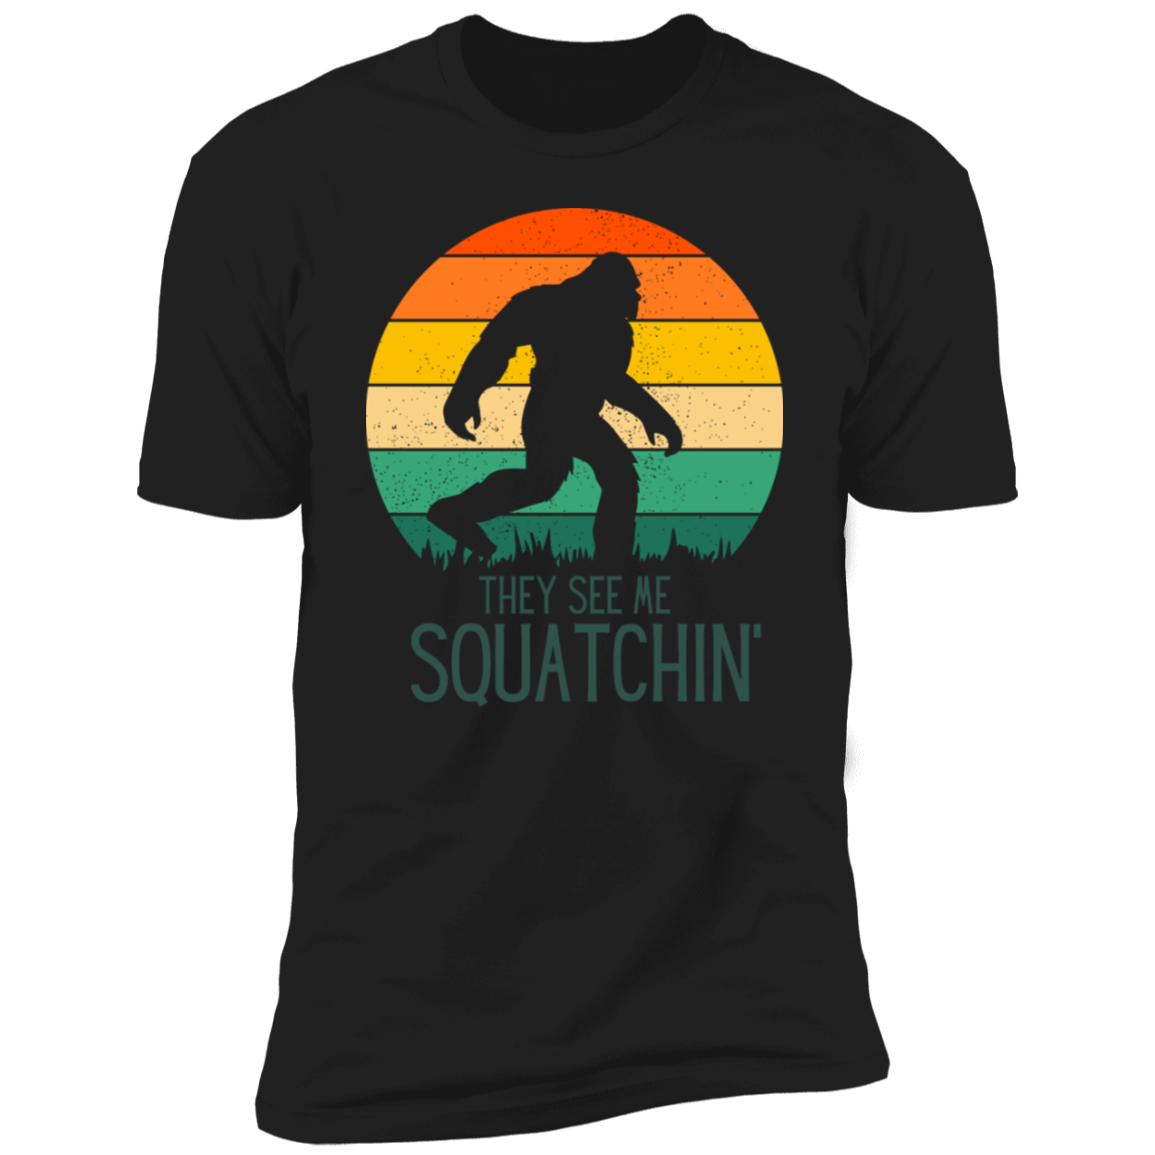 They see me Squatchin' T-Shirt